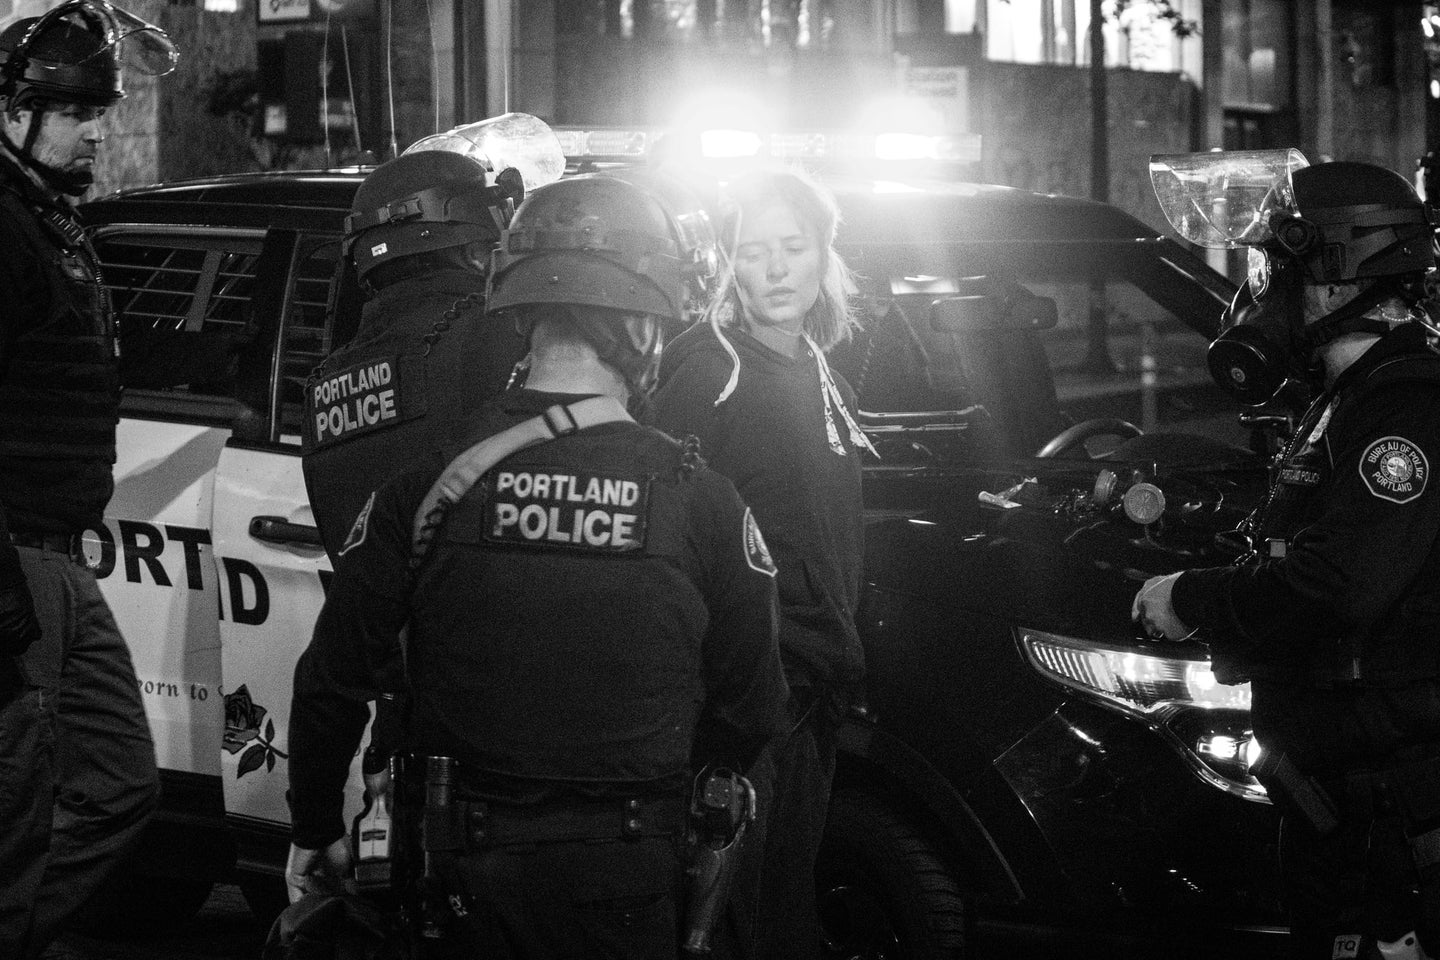 A protester in Portland getting arrested by the city's police department